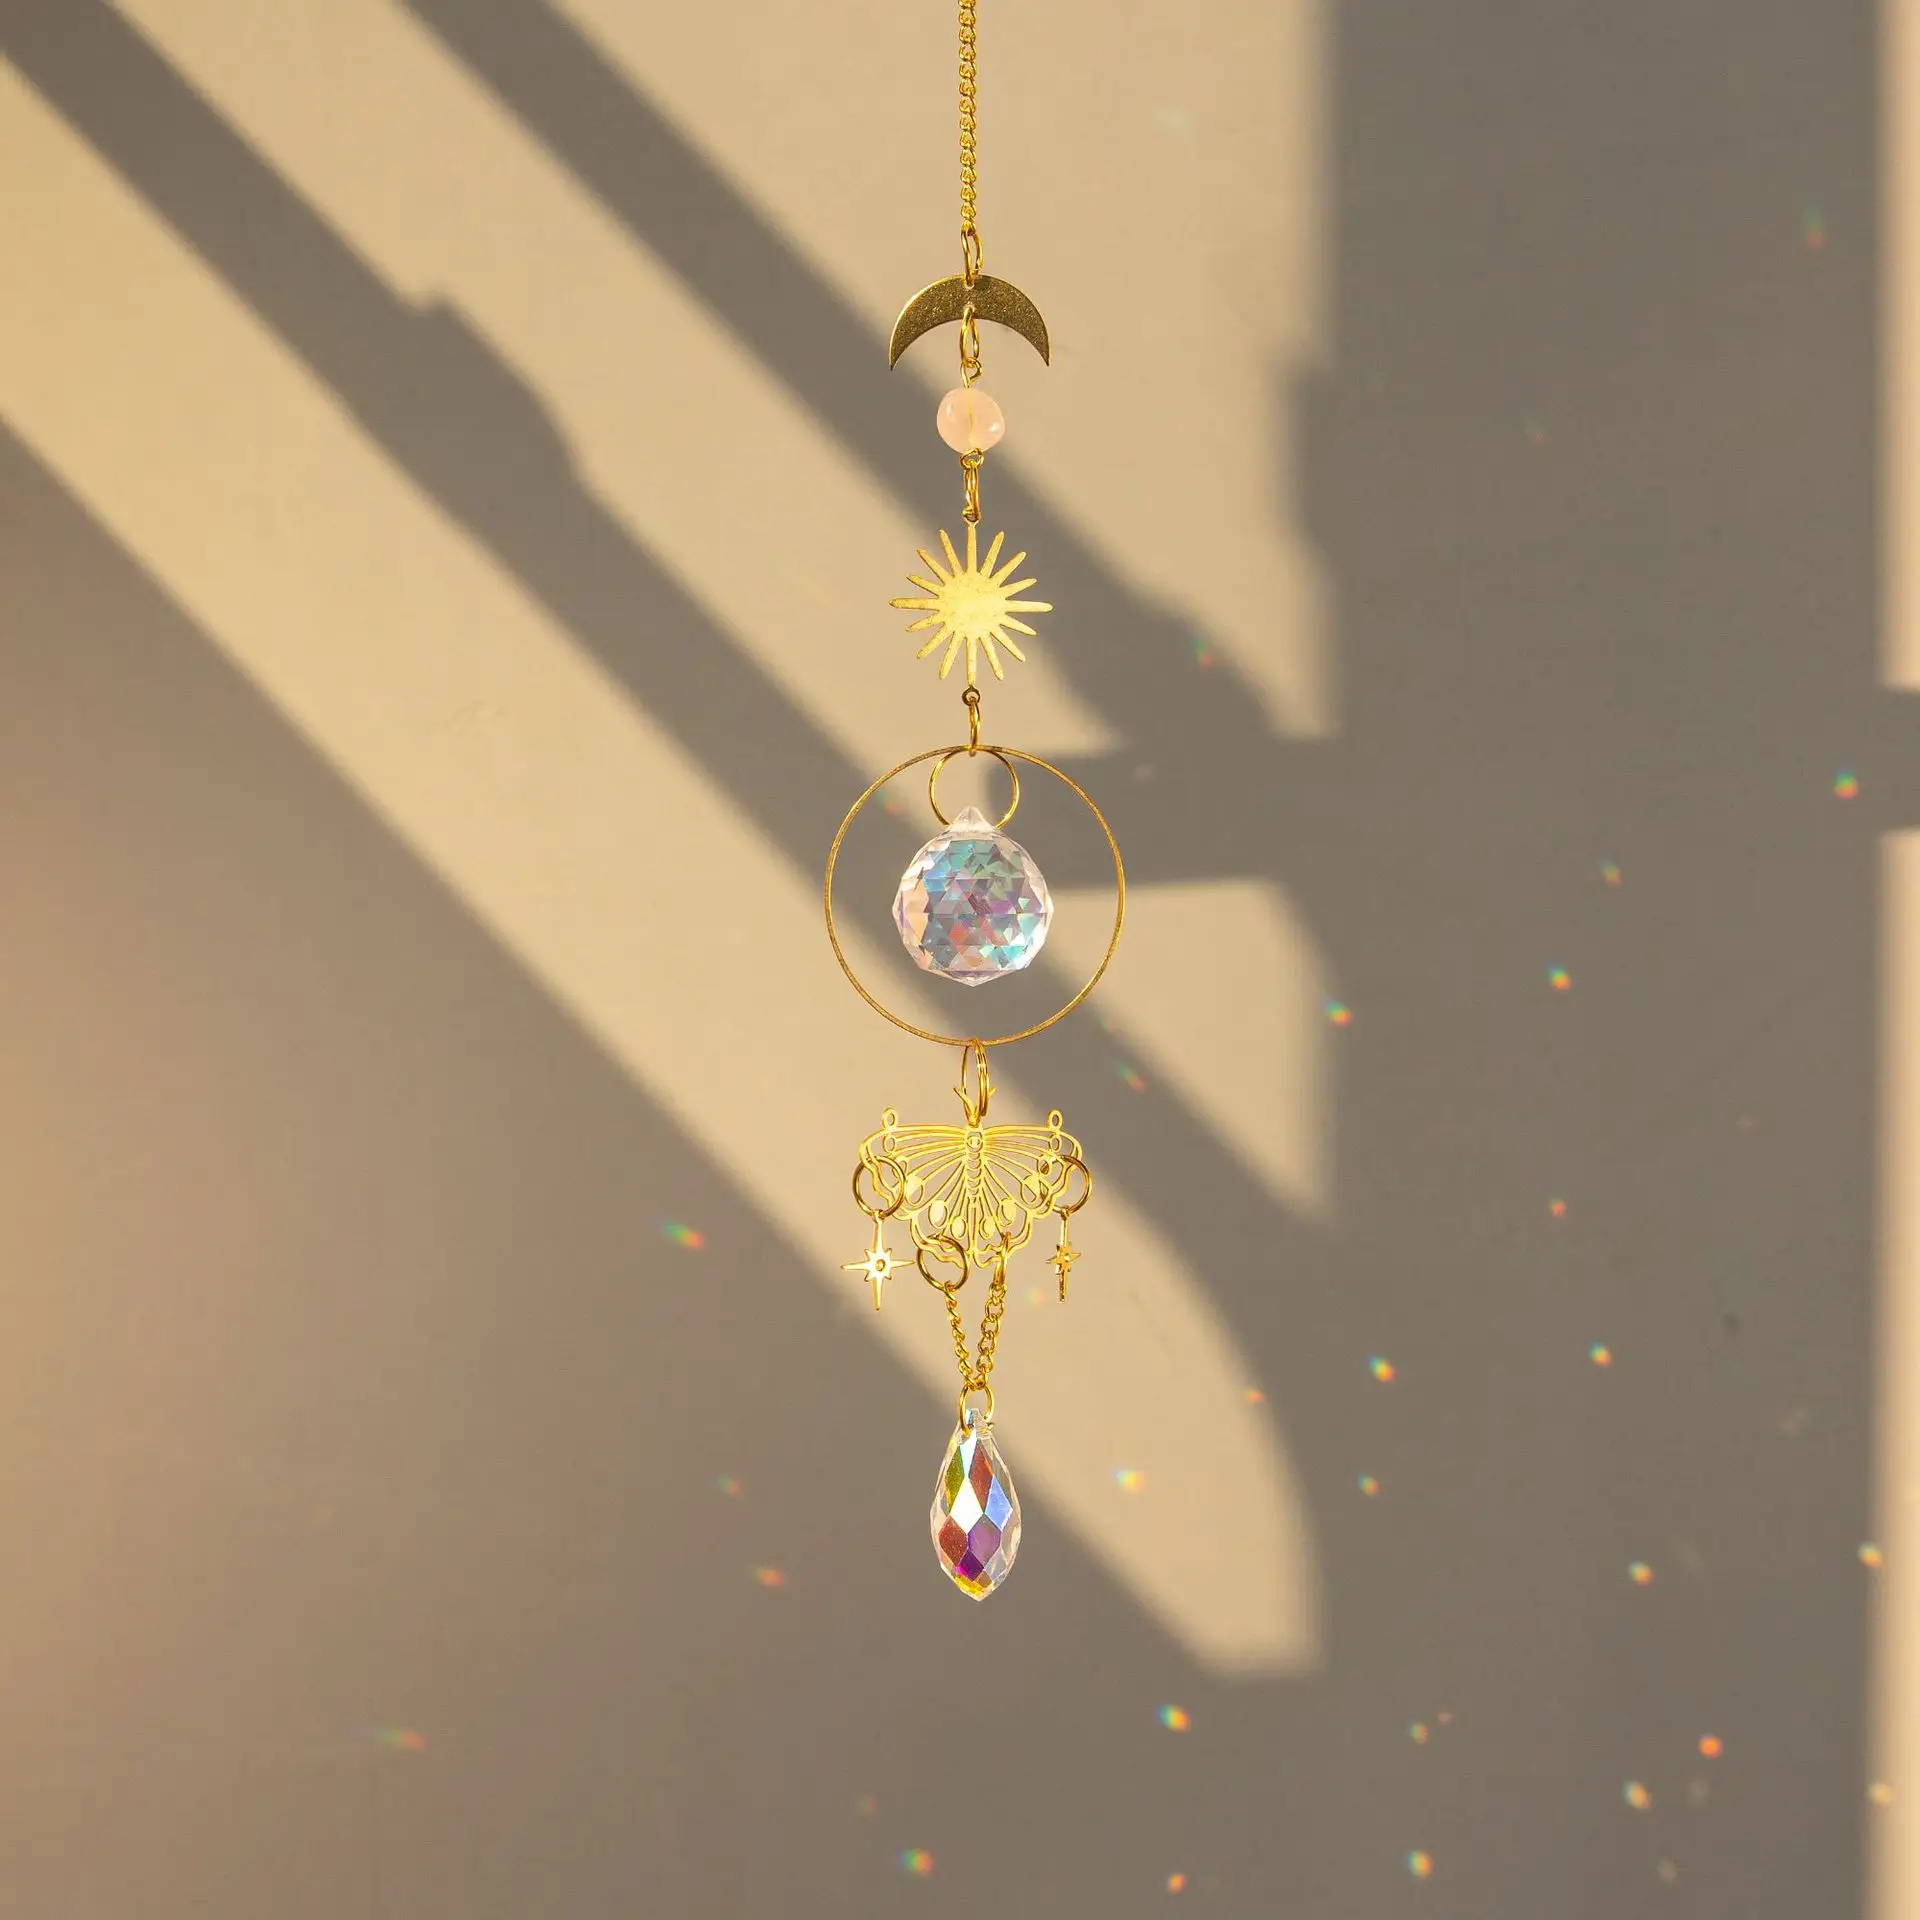 Dropshipping suncatchers wind chimes hanging prism rainbow prism sun catchers for decoration